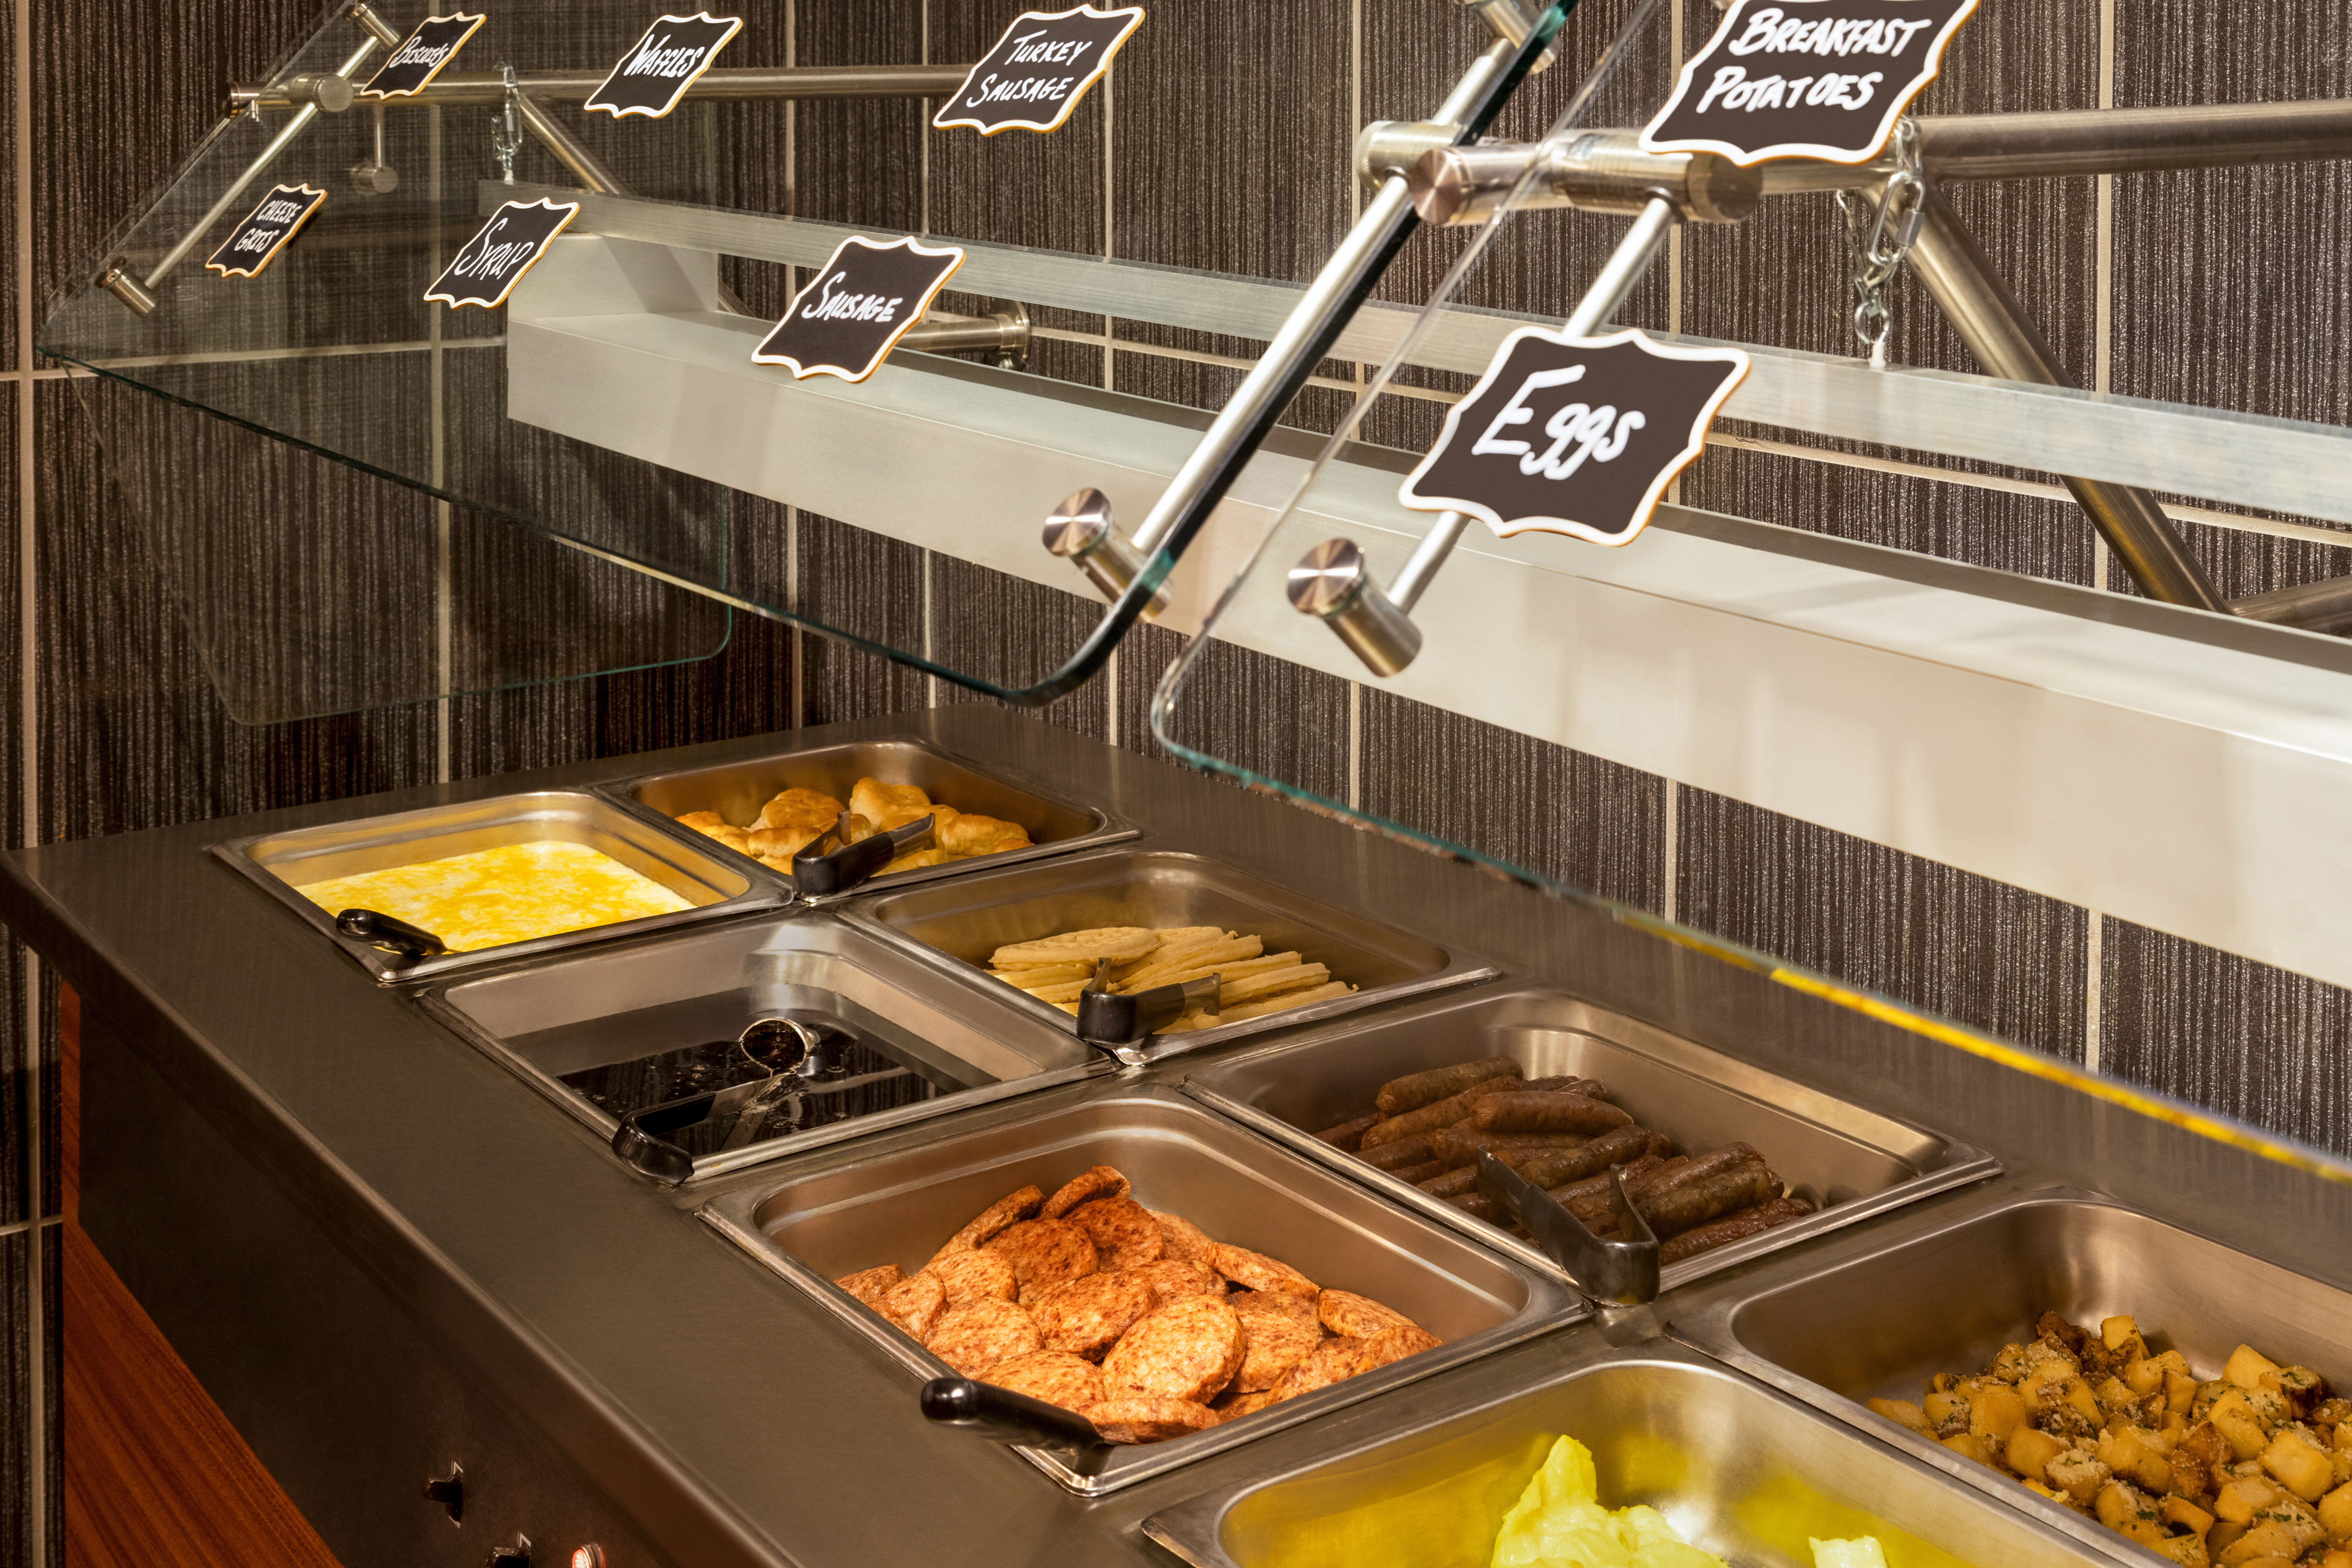 Our breakfast buffet offers a wide selection of food options.